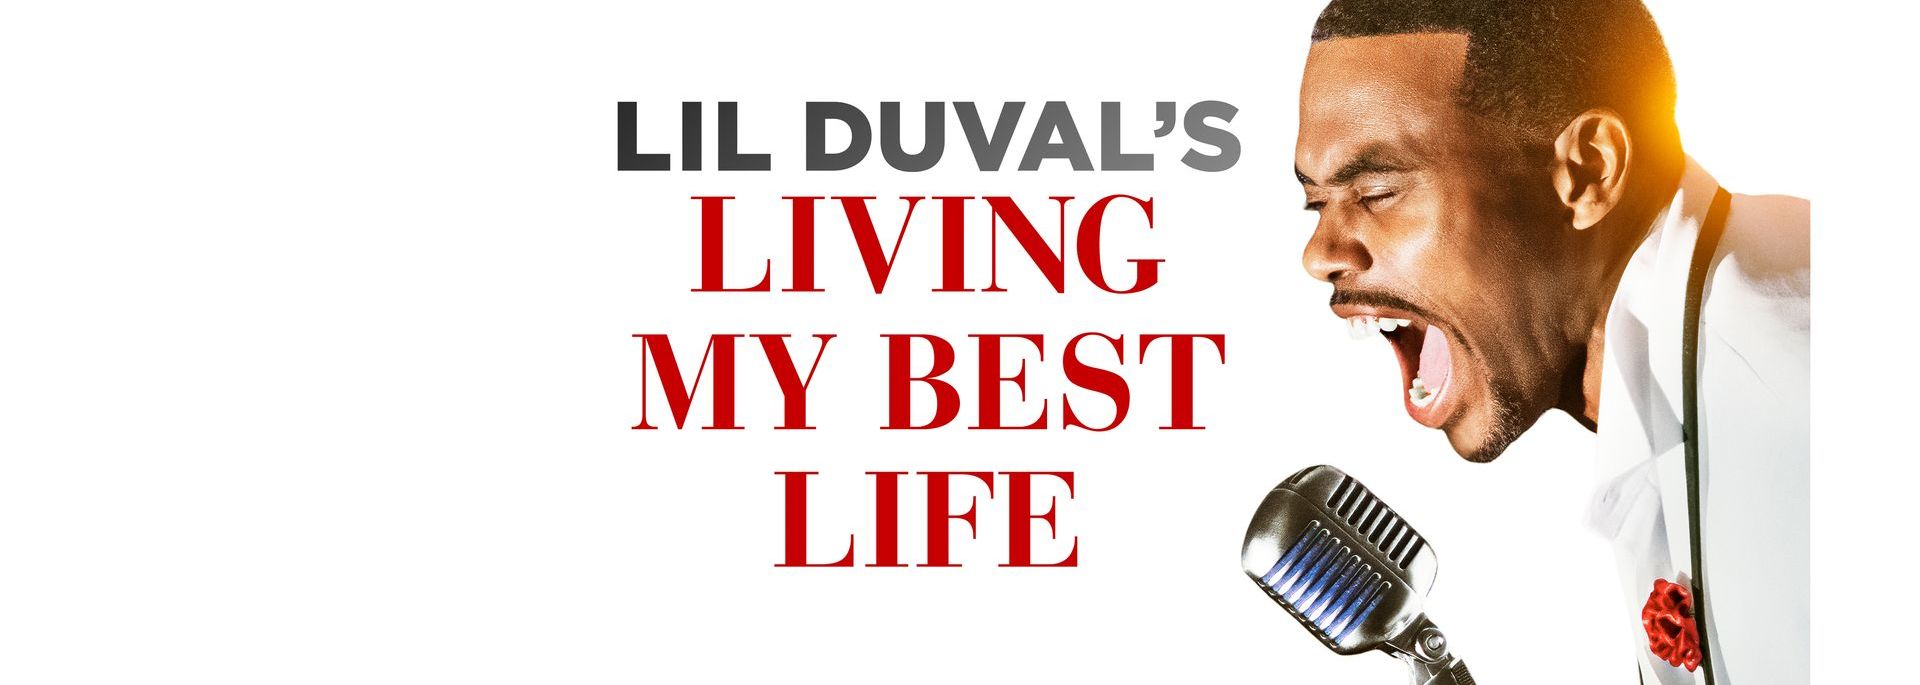 Lil Duval's Living My Best Life